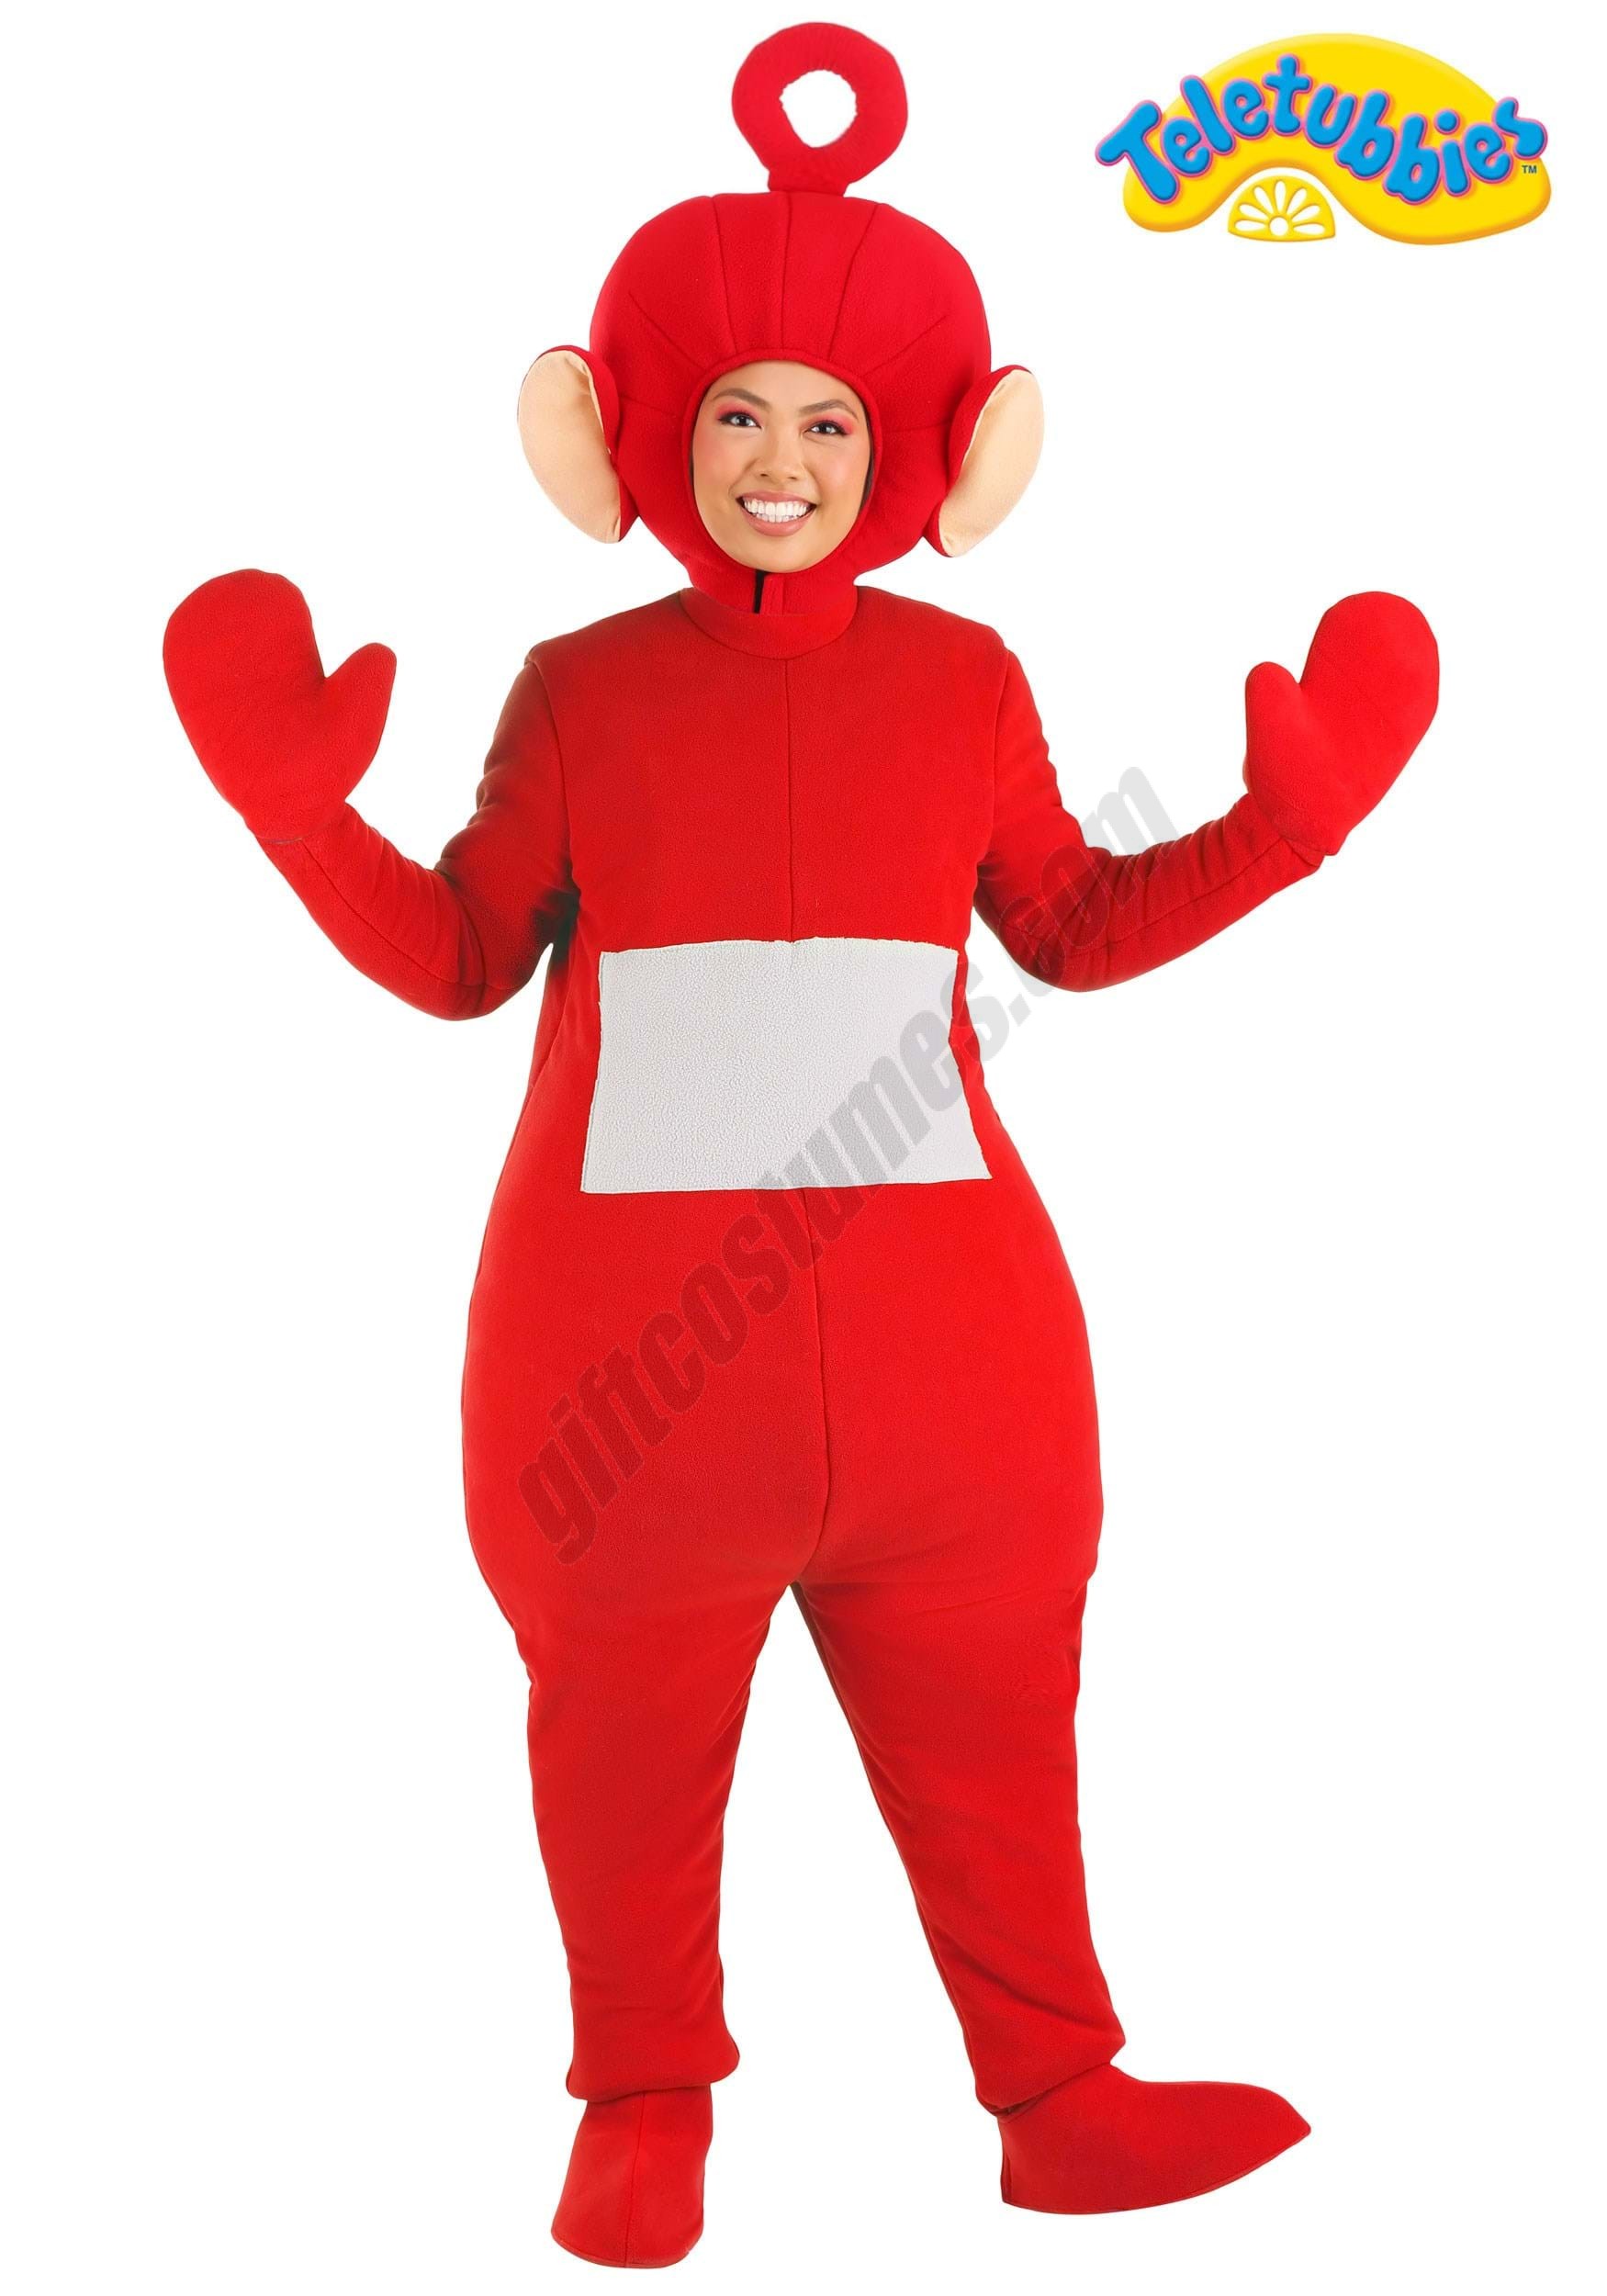 Po Teletubbies Costume for Adults Promotions - Po Teletubbies Costume for Adults Promotions